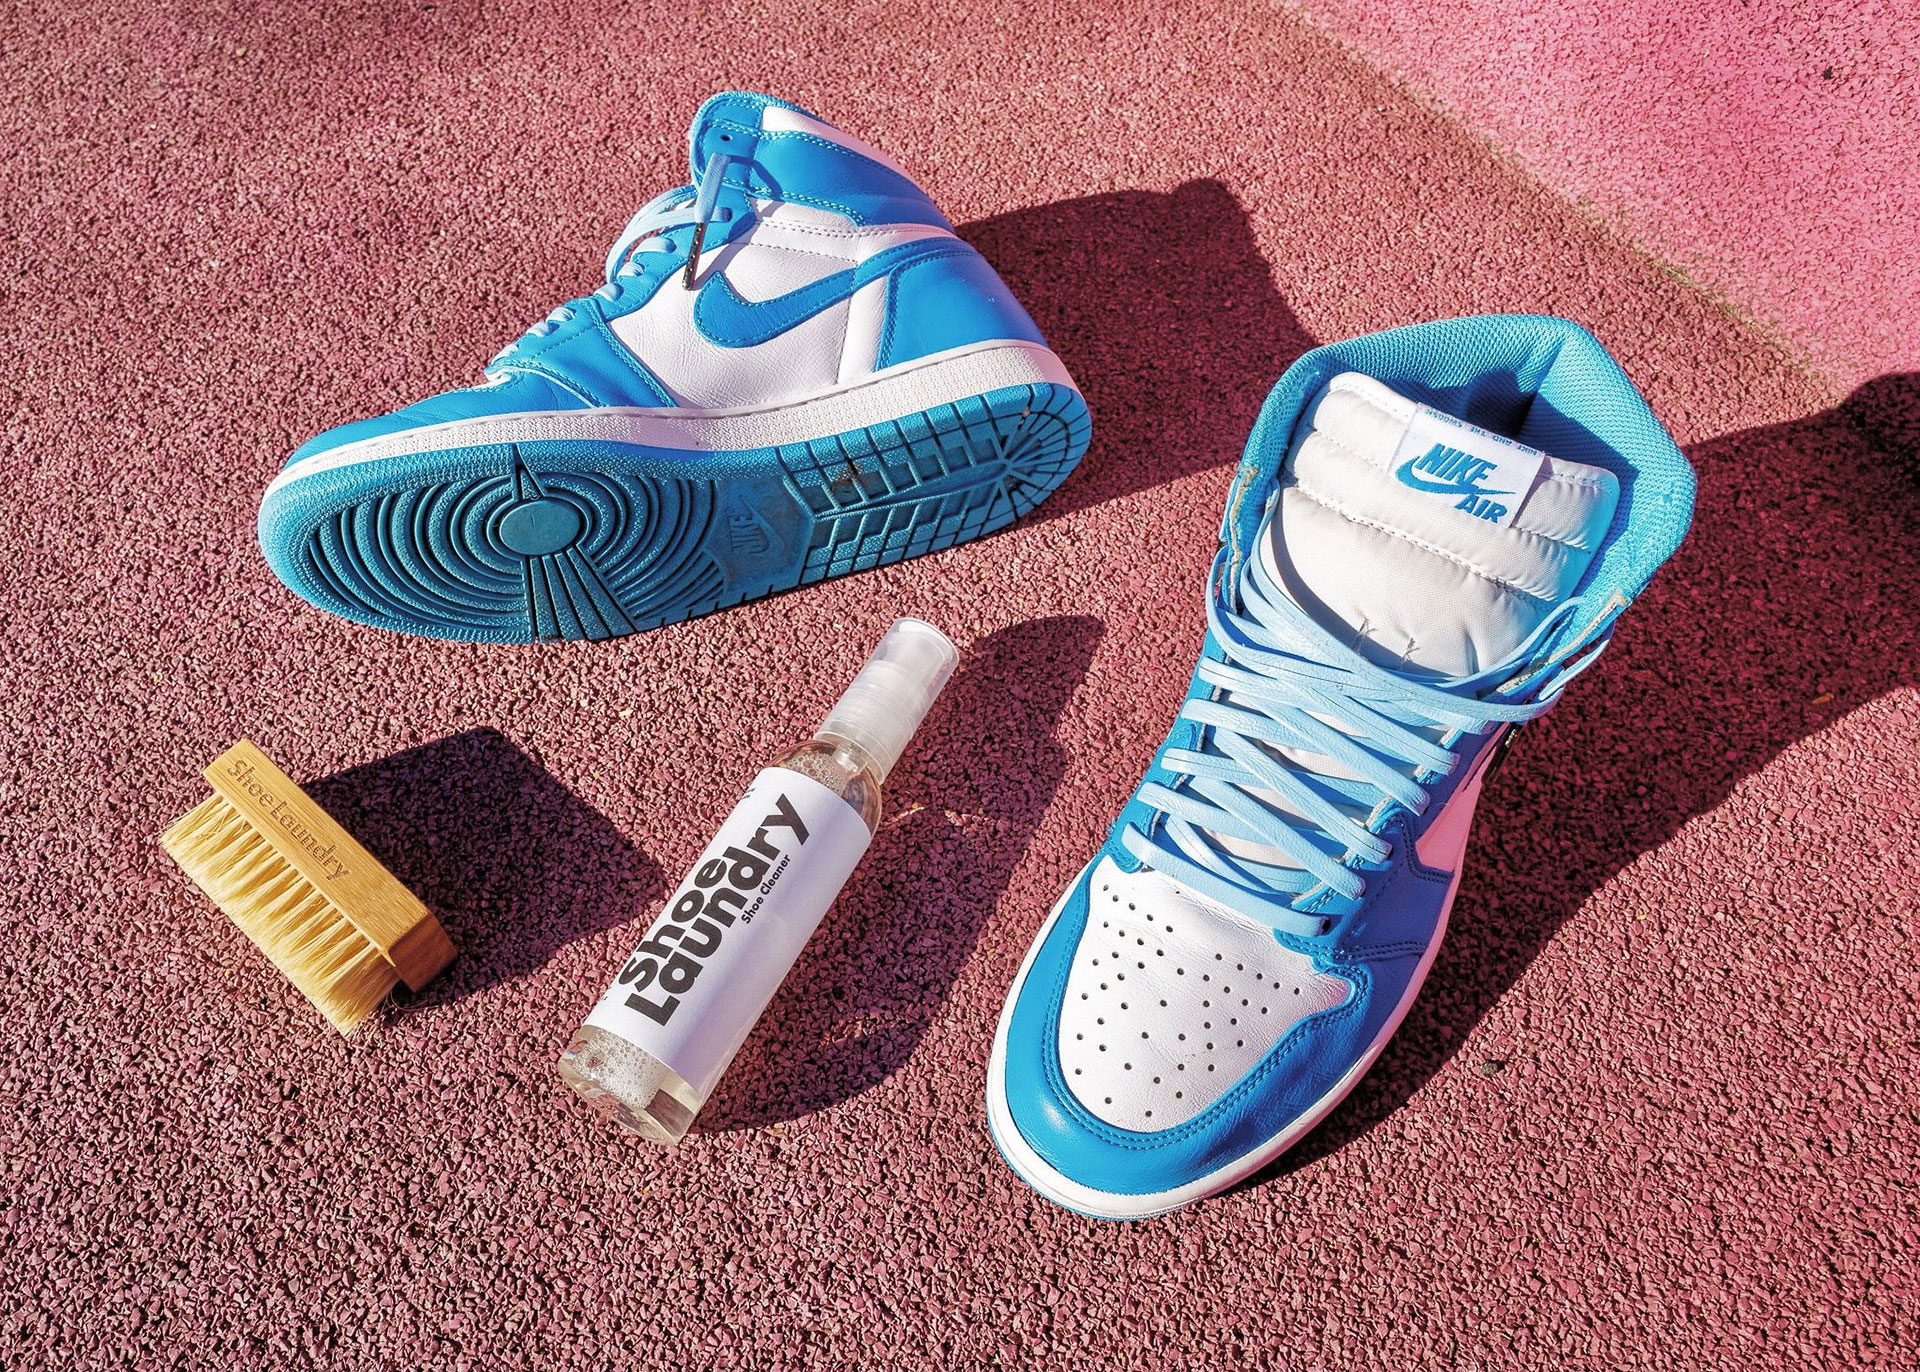 Sneaker care: Here's a step-by-step guide on how to clean your sneakers